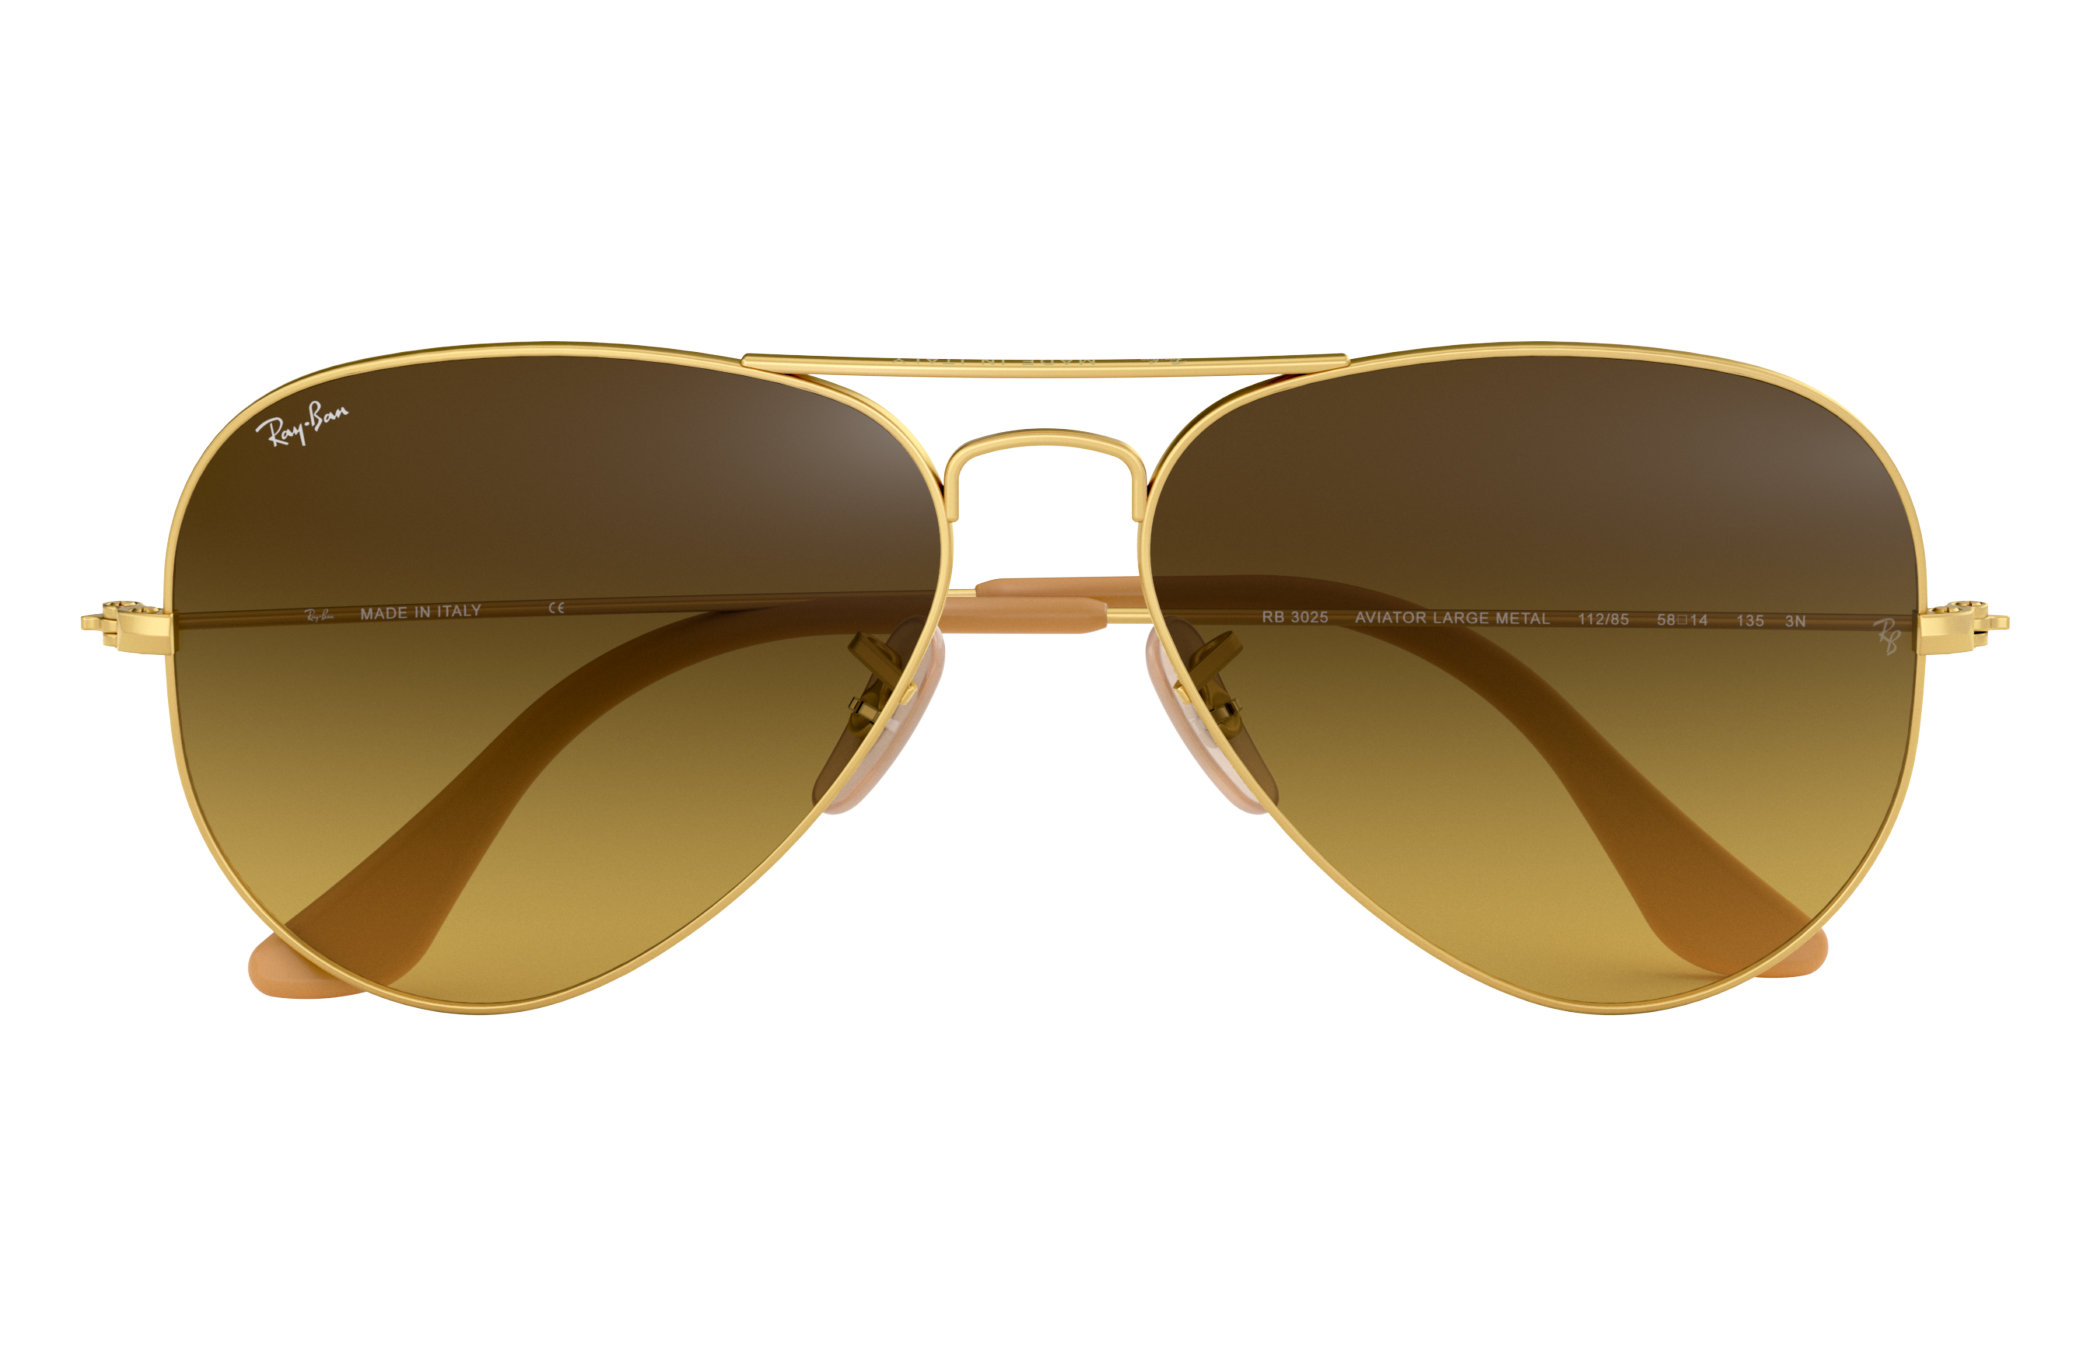 ray ban aviator gold brown gradient